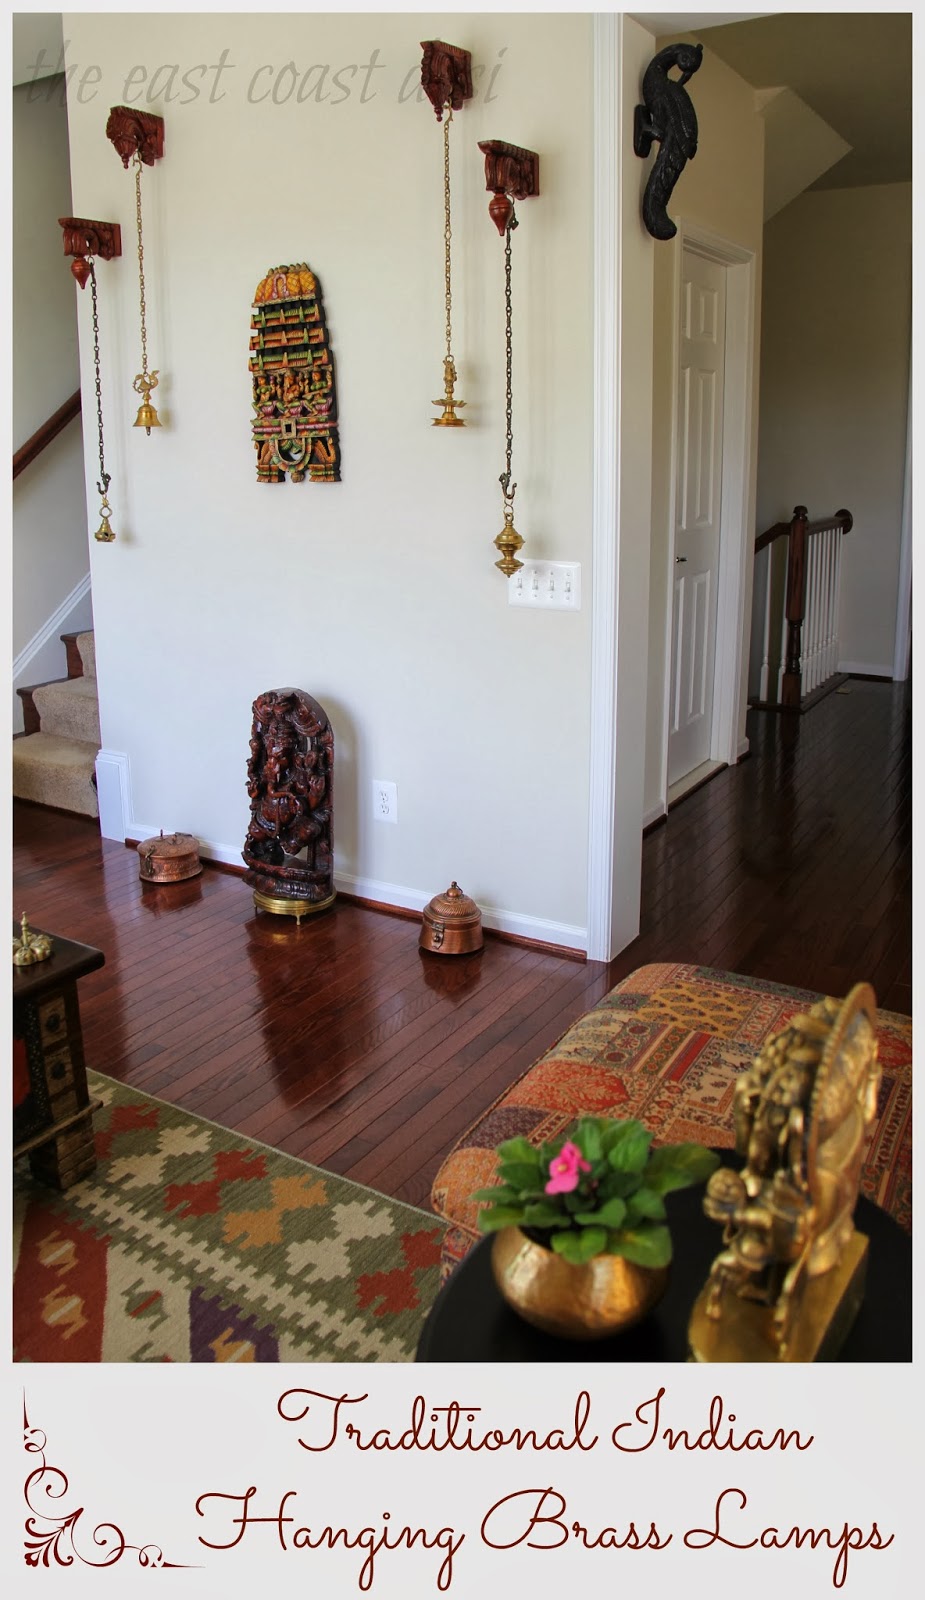 the east coast desi: My Living Room a reflection of INDIA ...